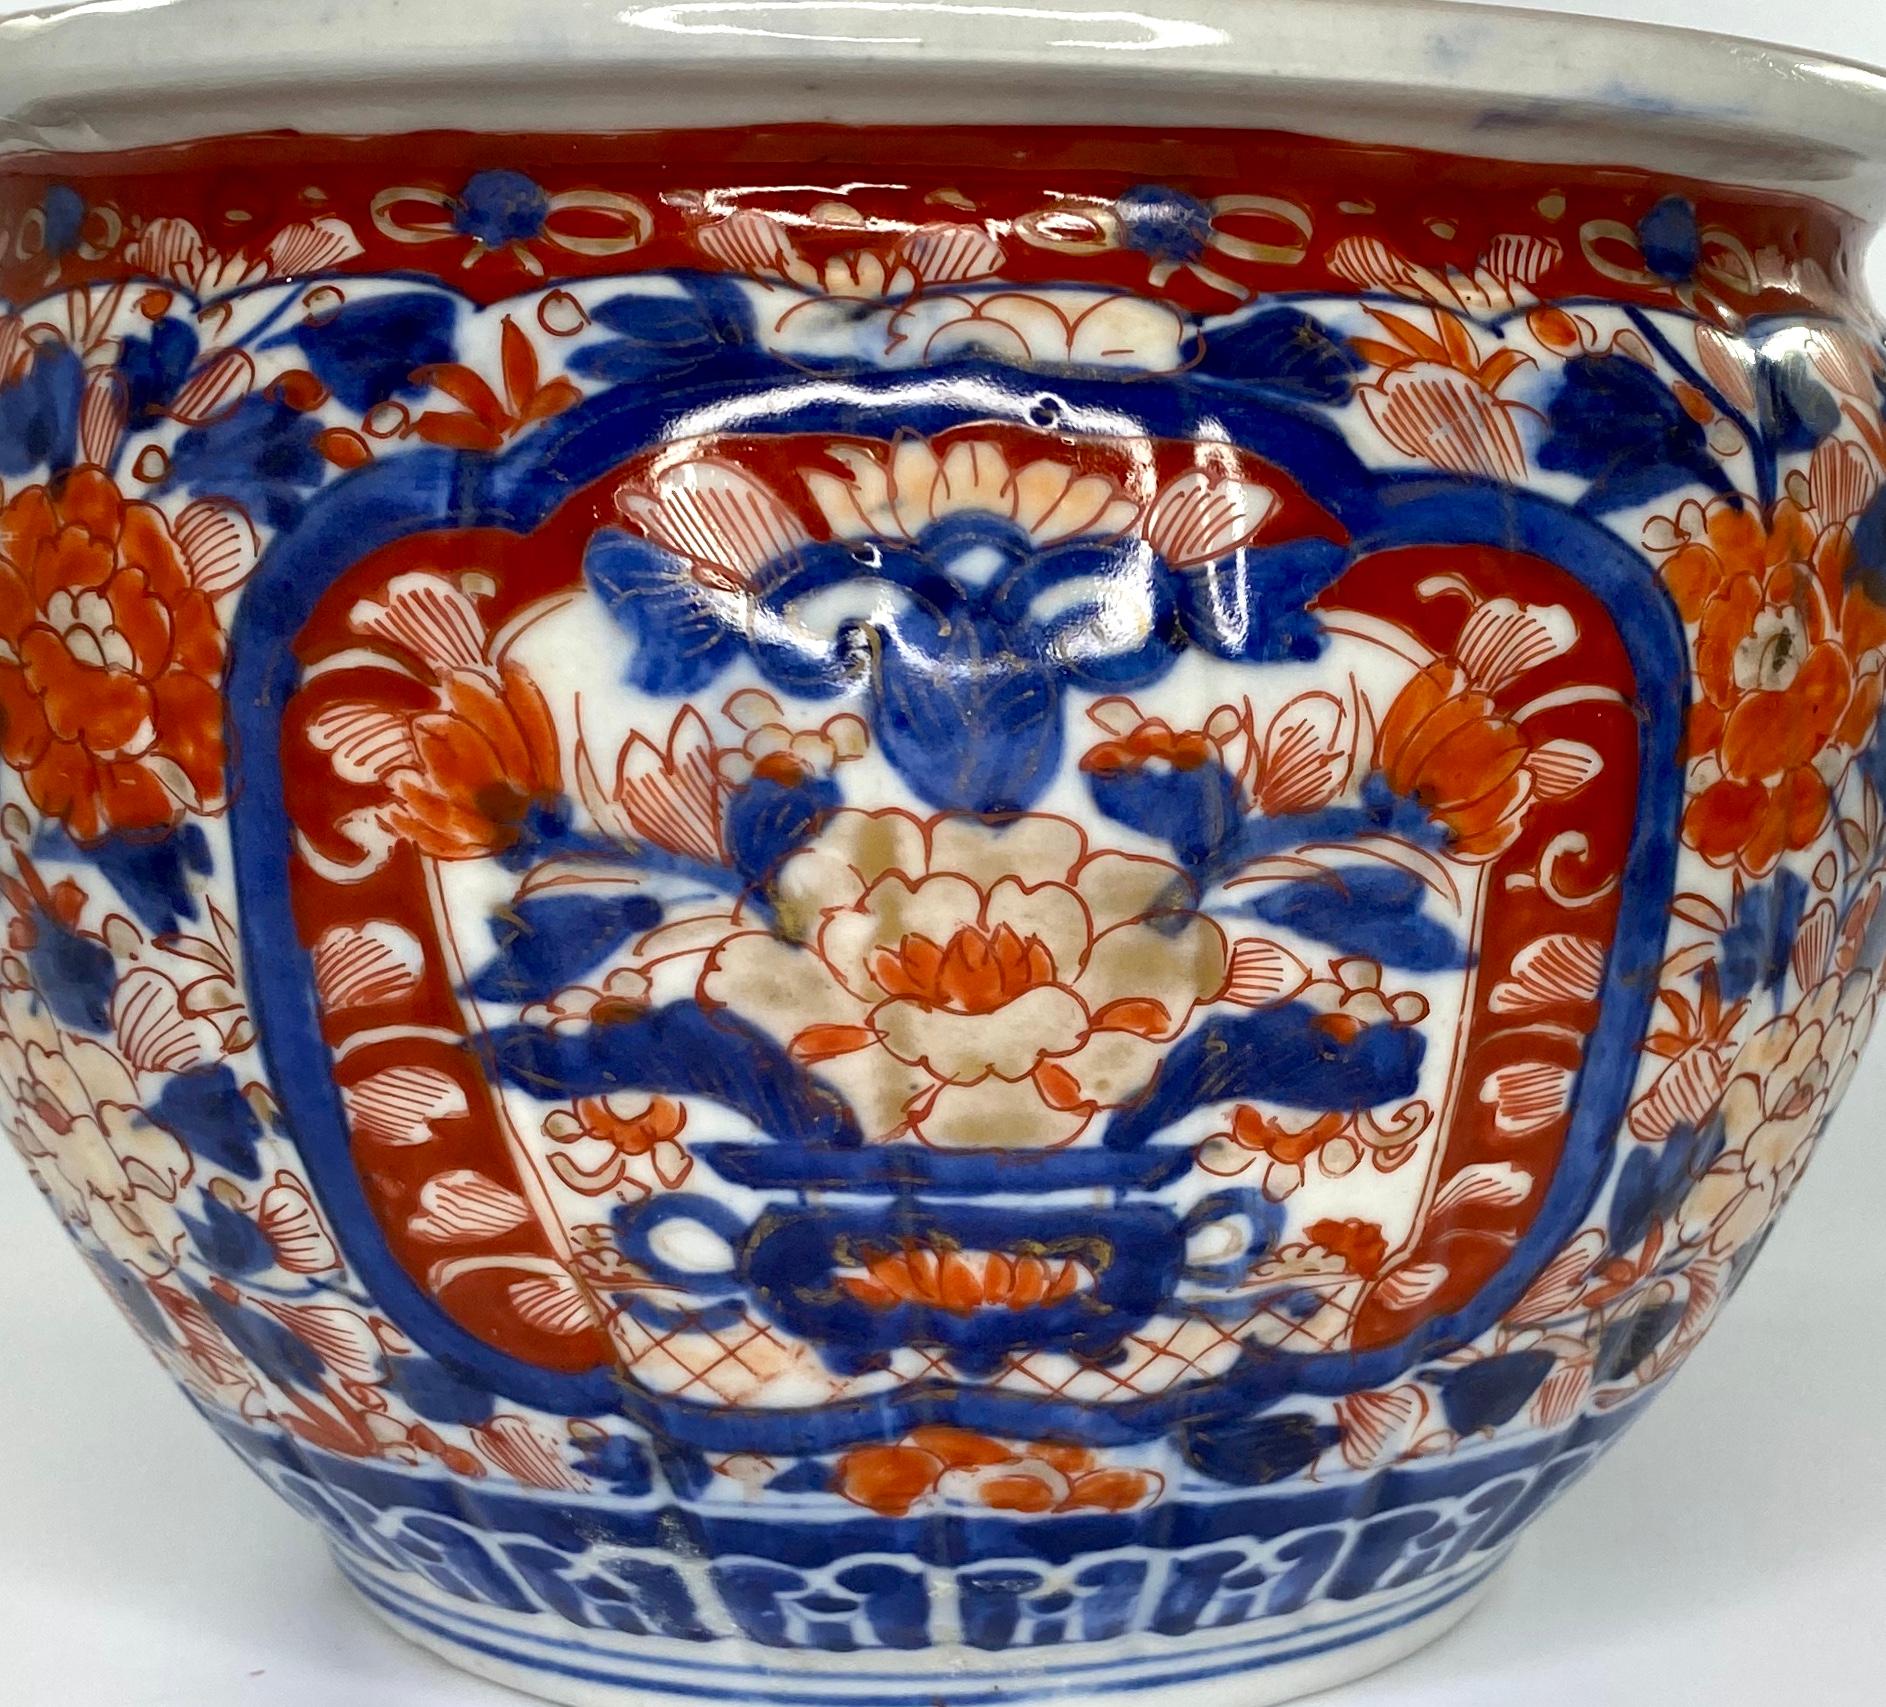 Japanese ‘Imari’ porcelain jardinière, circa 1890, Meiji Period. The lightly fluted jardiniere hand painted in typical Imari colors, with shaped panels containing vases of flowers, and flowering plants, on a ground of dense, stylised flowering